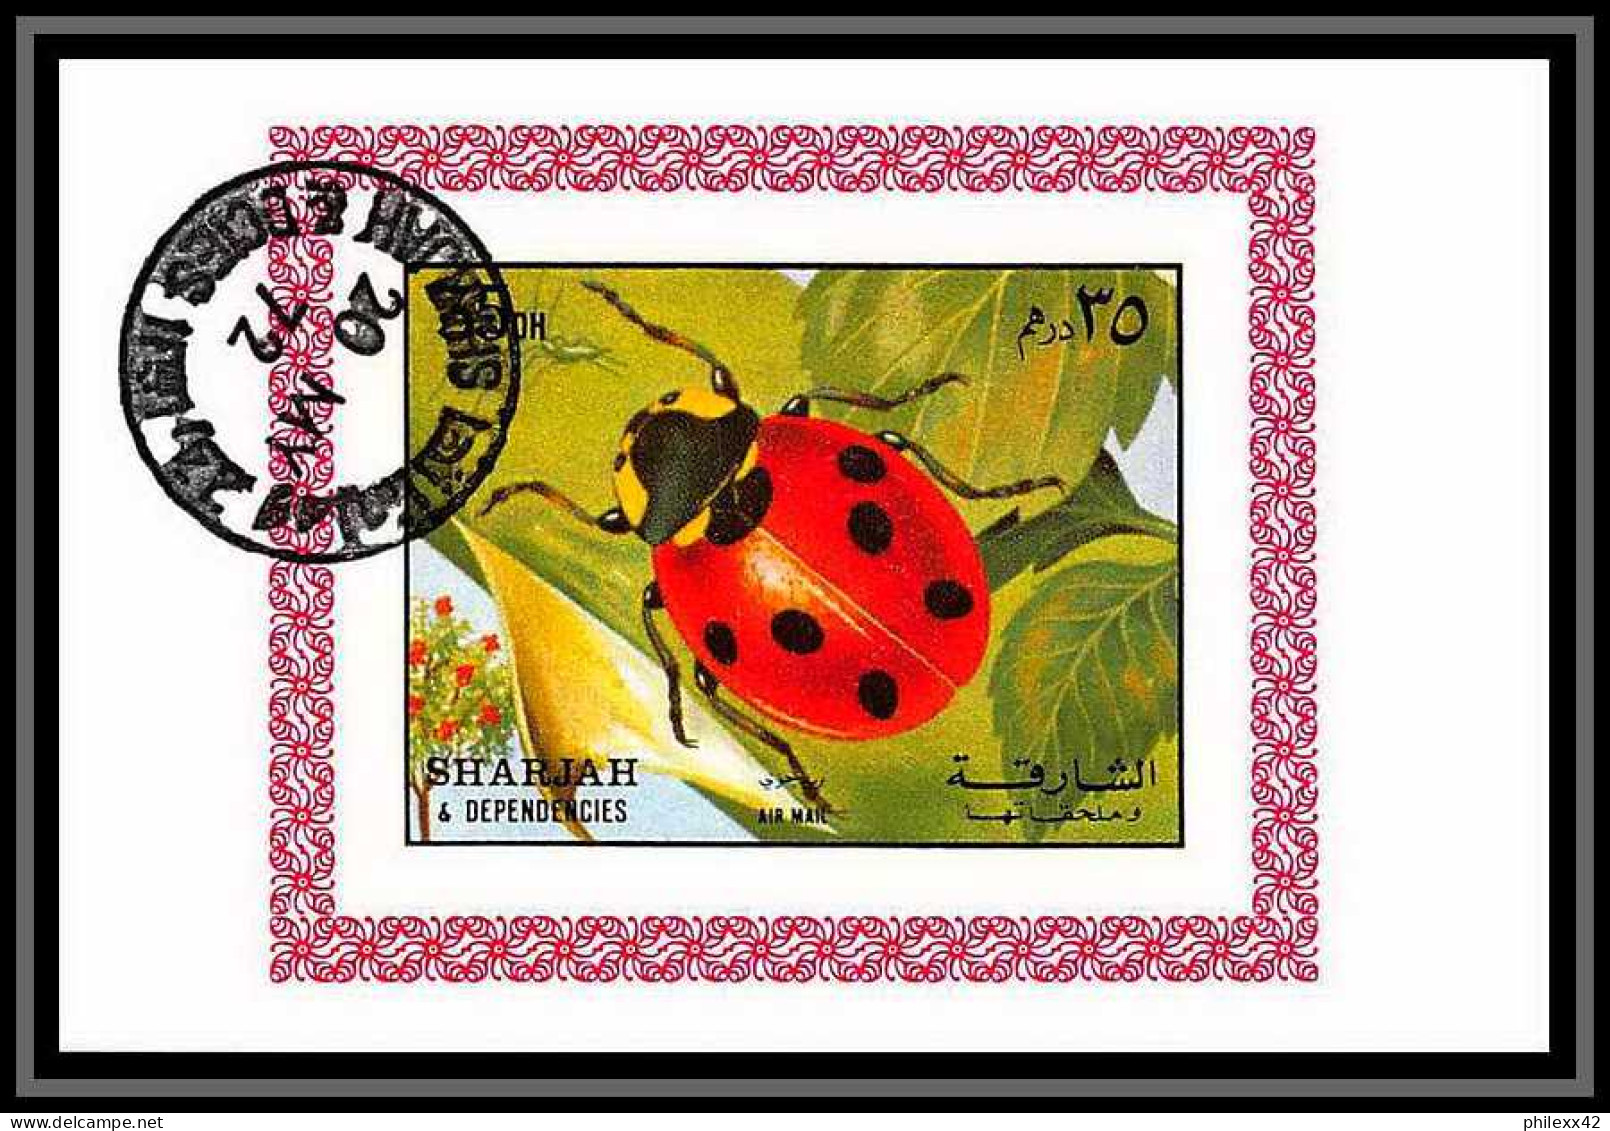 Sharjah - 2038/ N° 1204/1209 invertabrates wasp guepe bee abeille ladybird snail ant bumblebee deluxe blocs used 